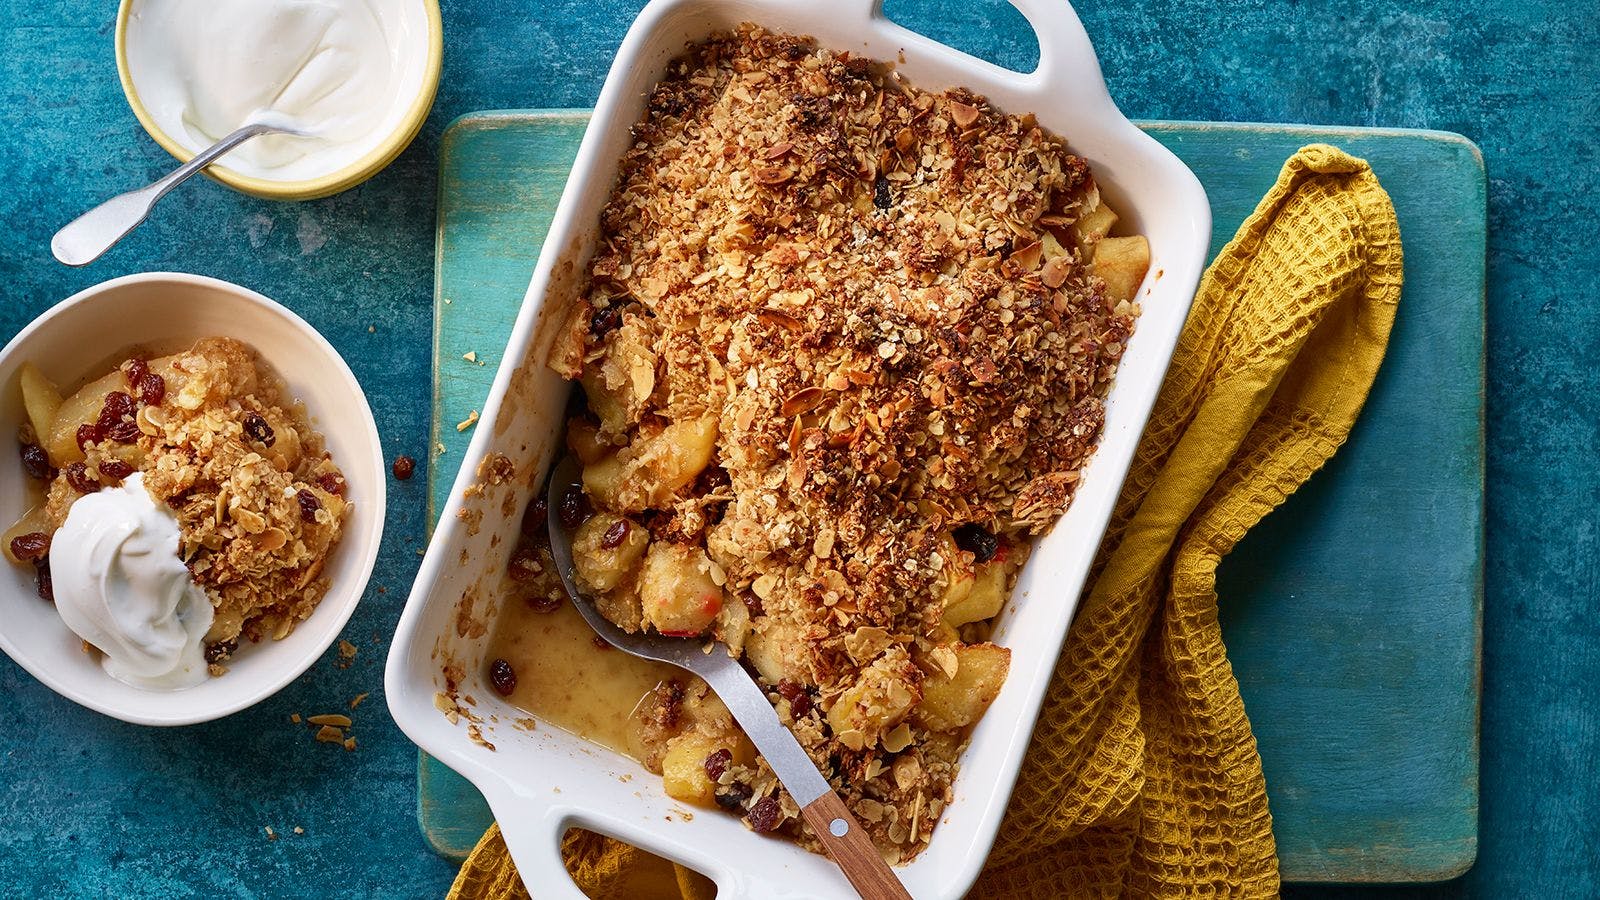 Apple and Pear crumble